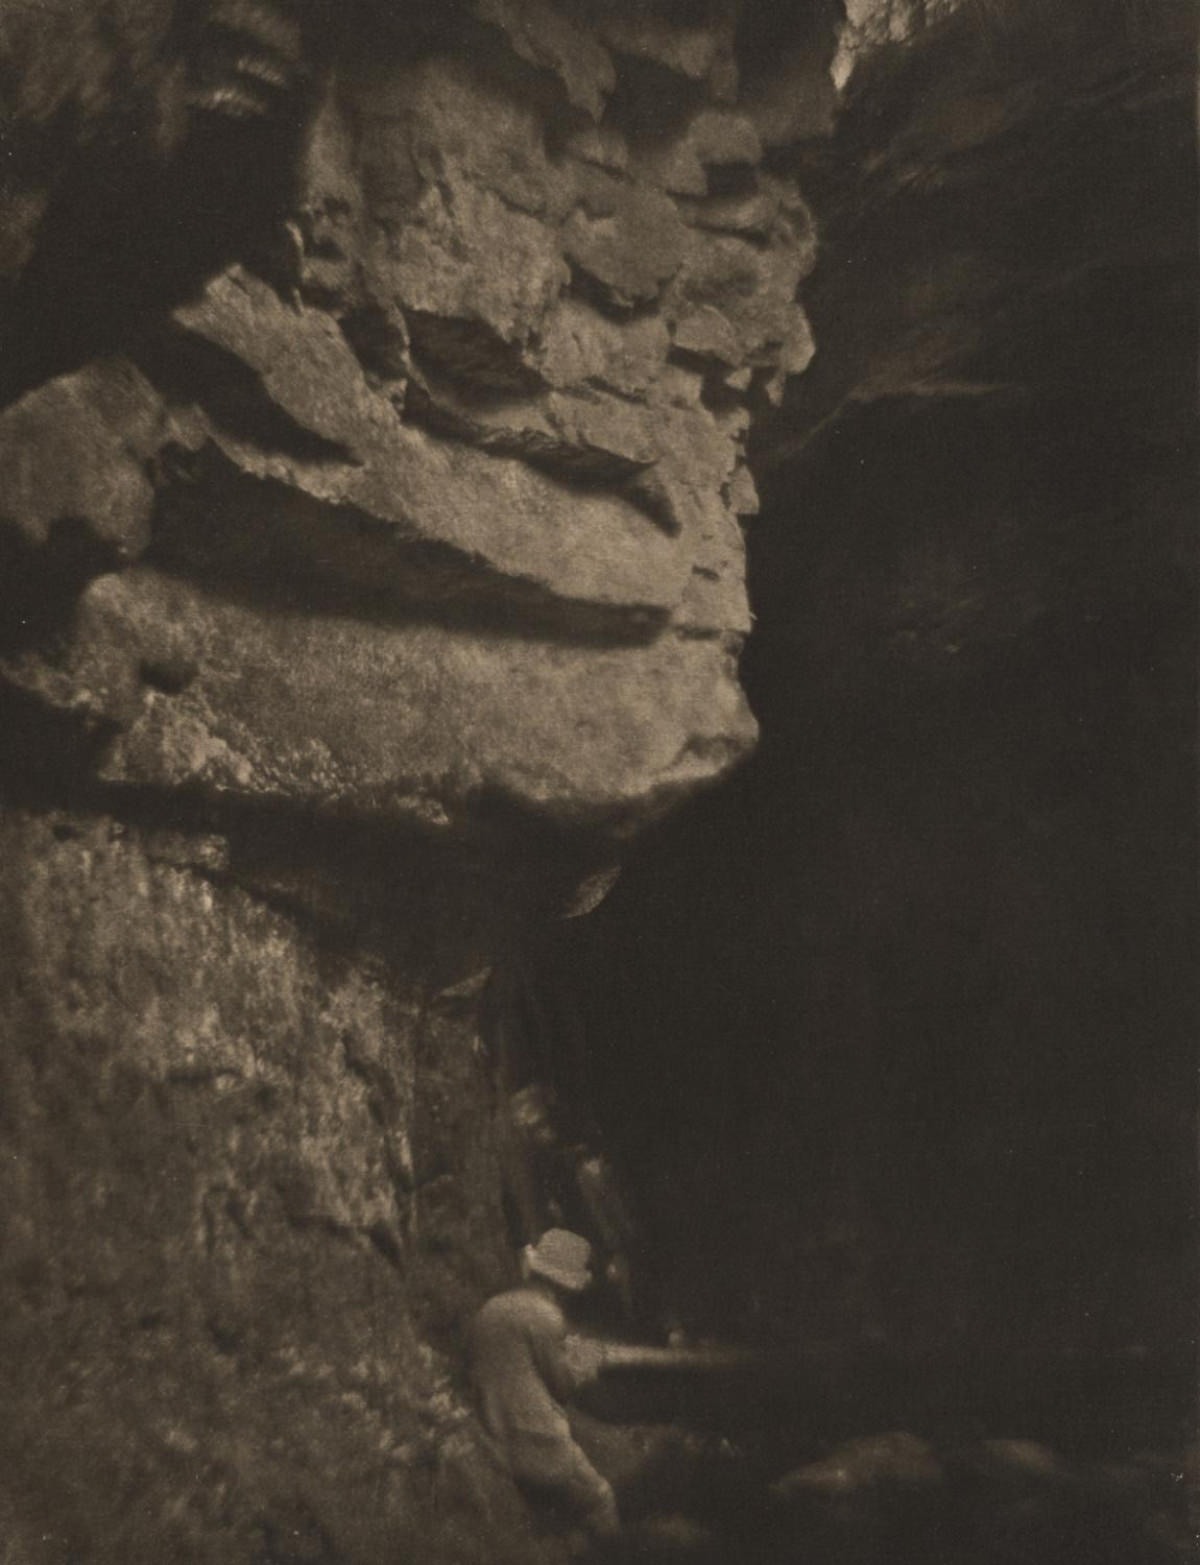 The Extraordinary Photography of James Craig Annan from the Late 19th Century